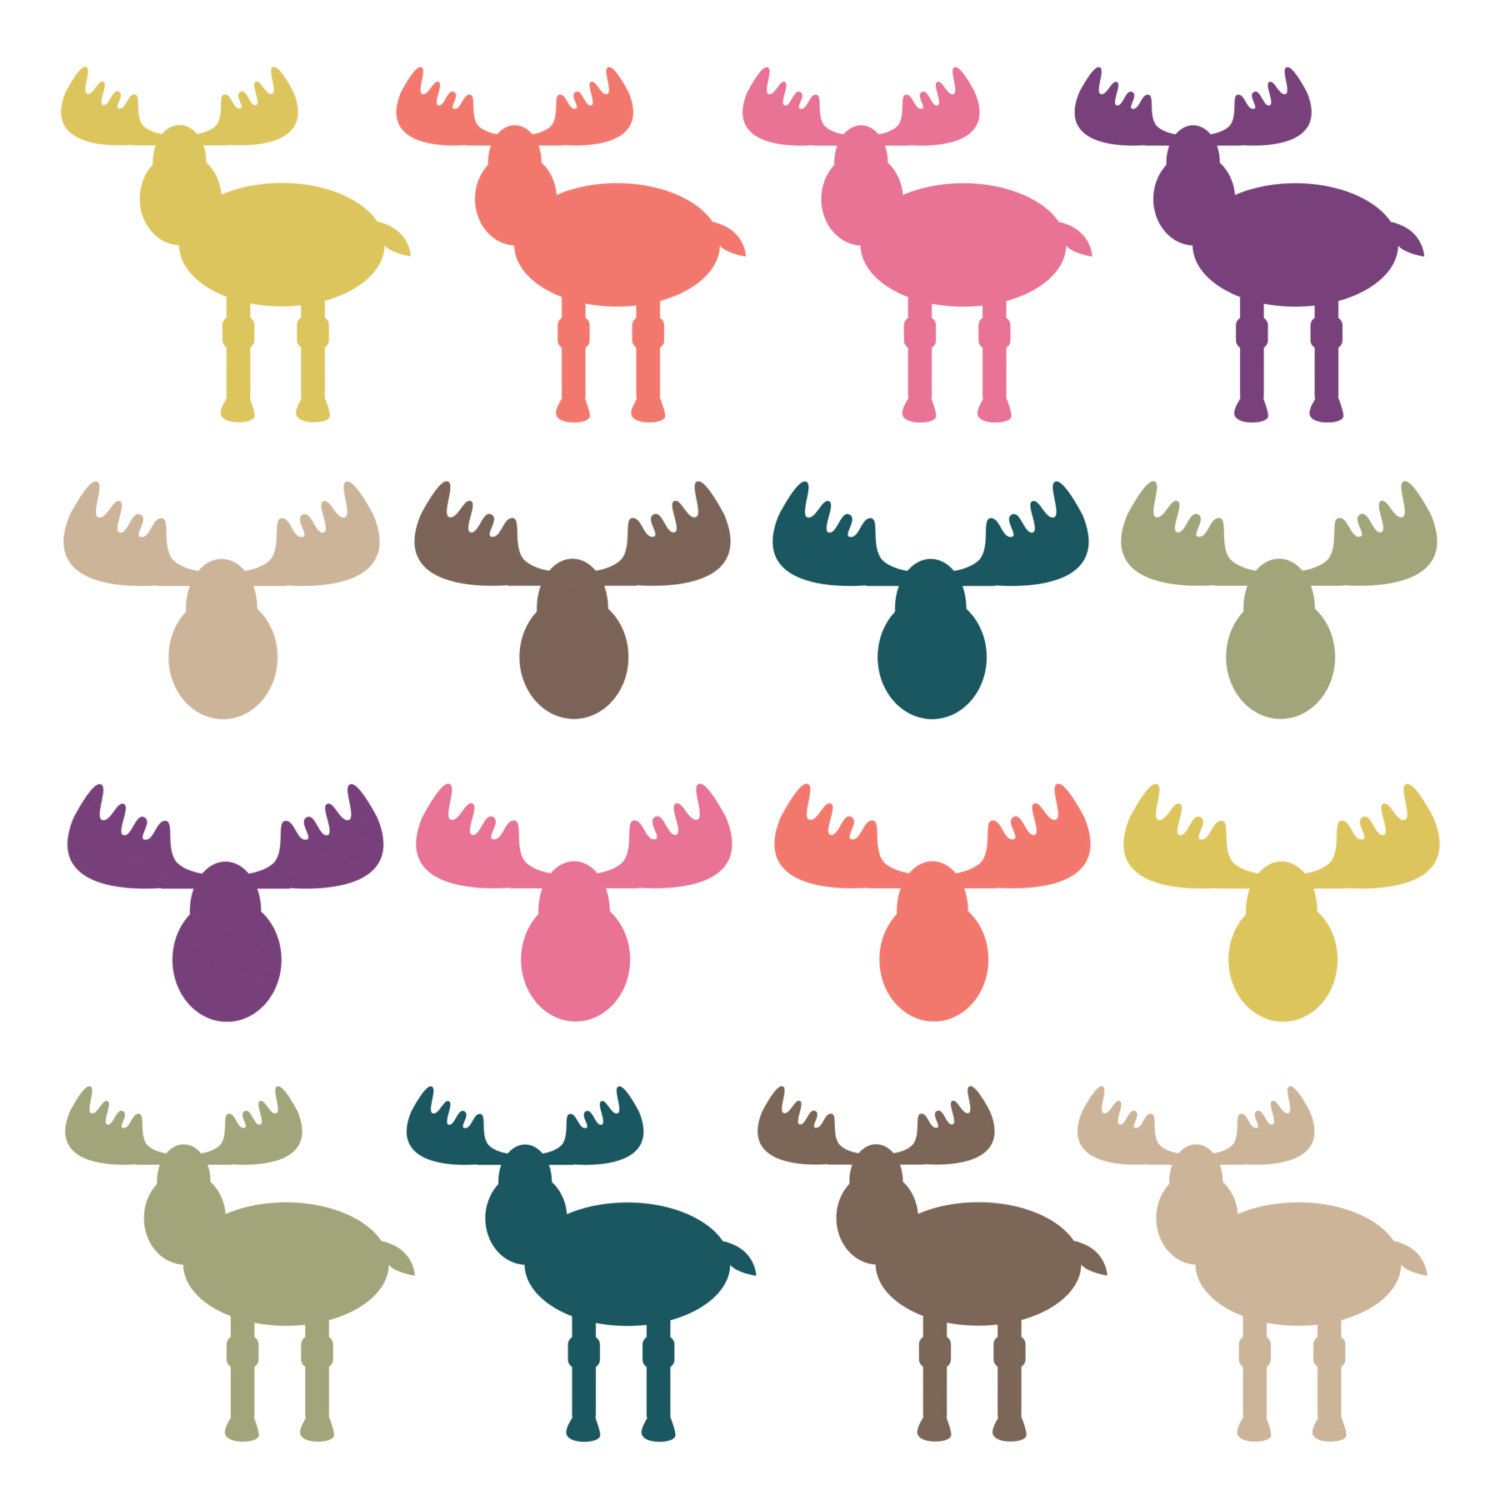 Antlers clipart moose. Instant download heads woodland